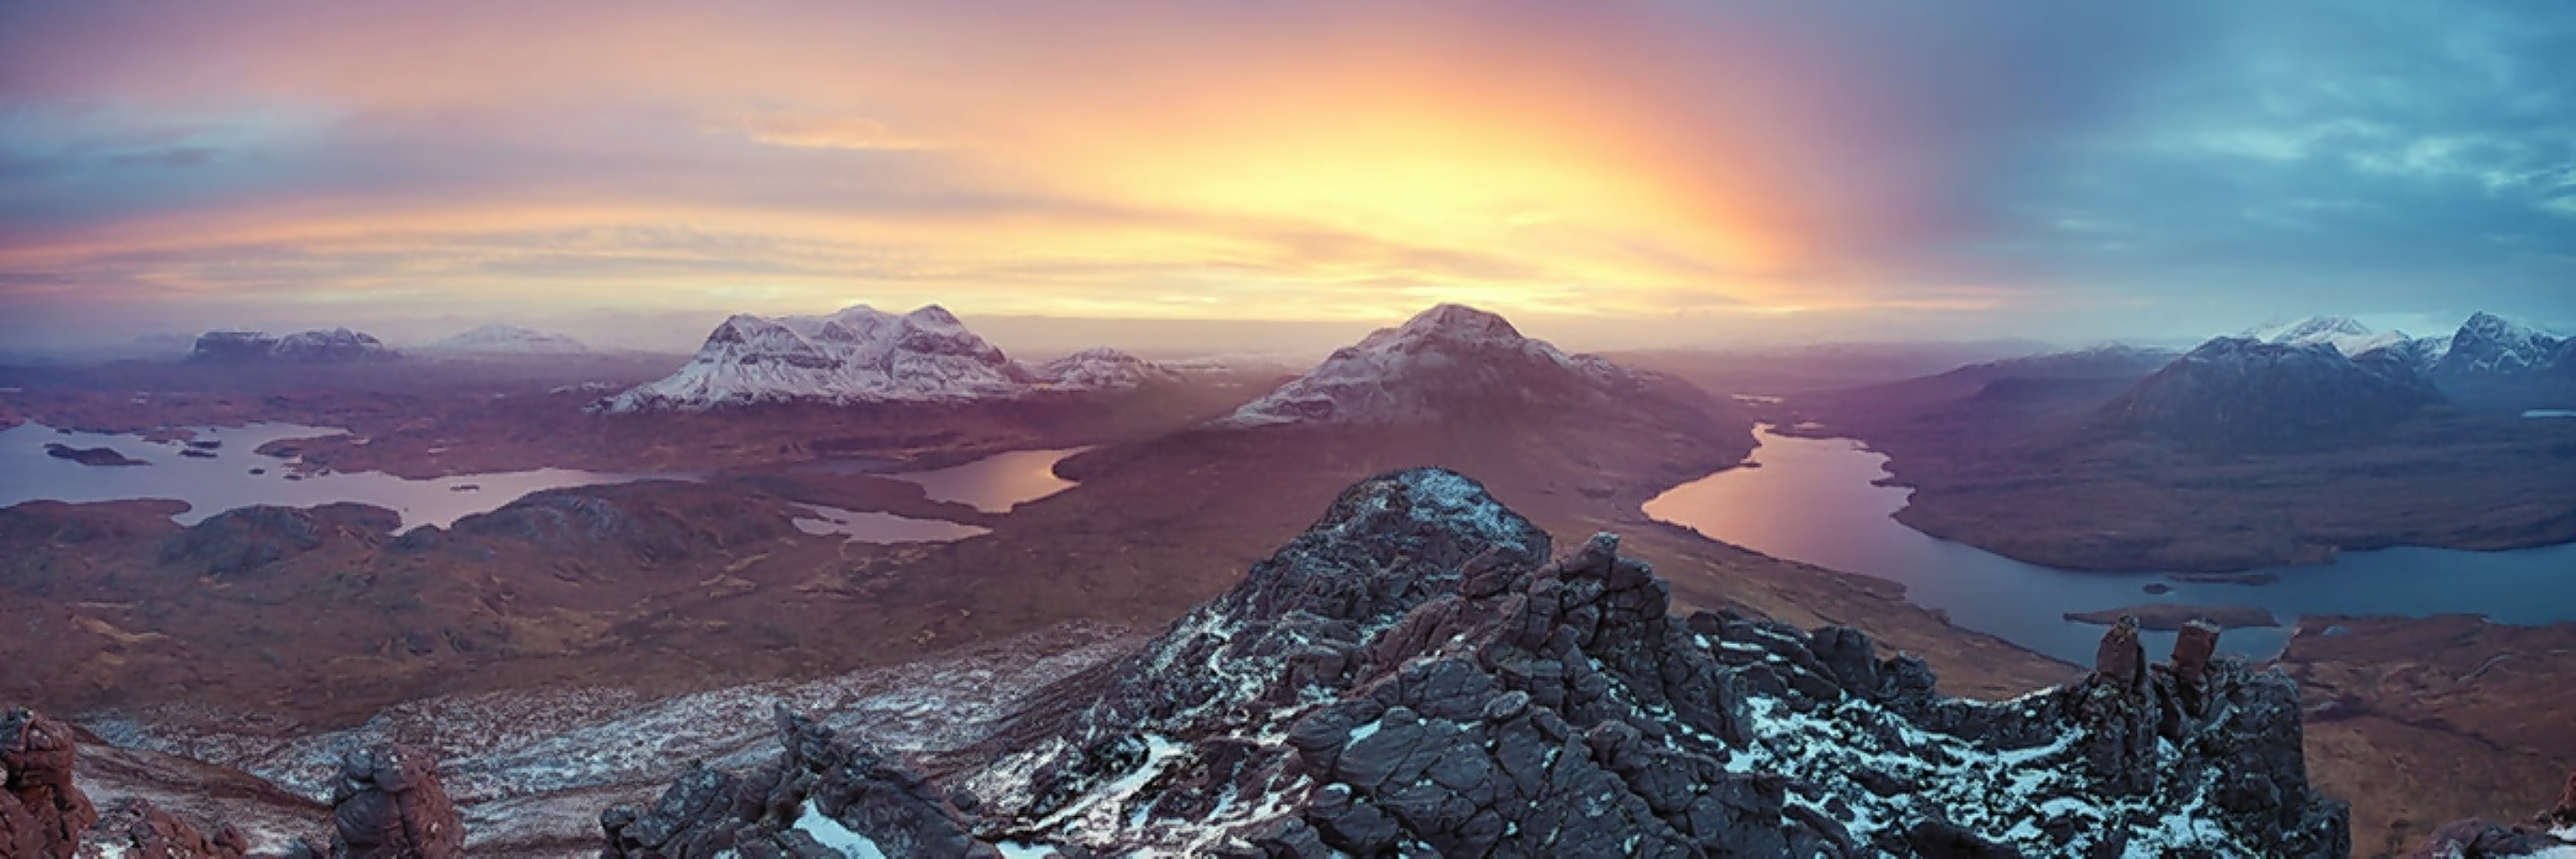 The Assynt mountain range, with Suilven in the background